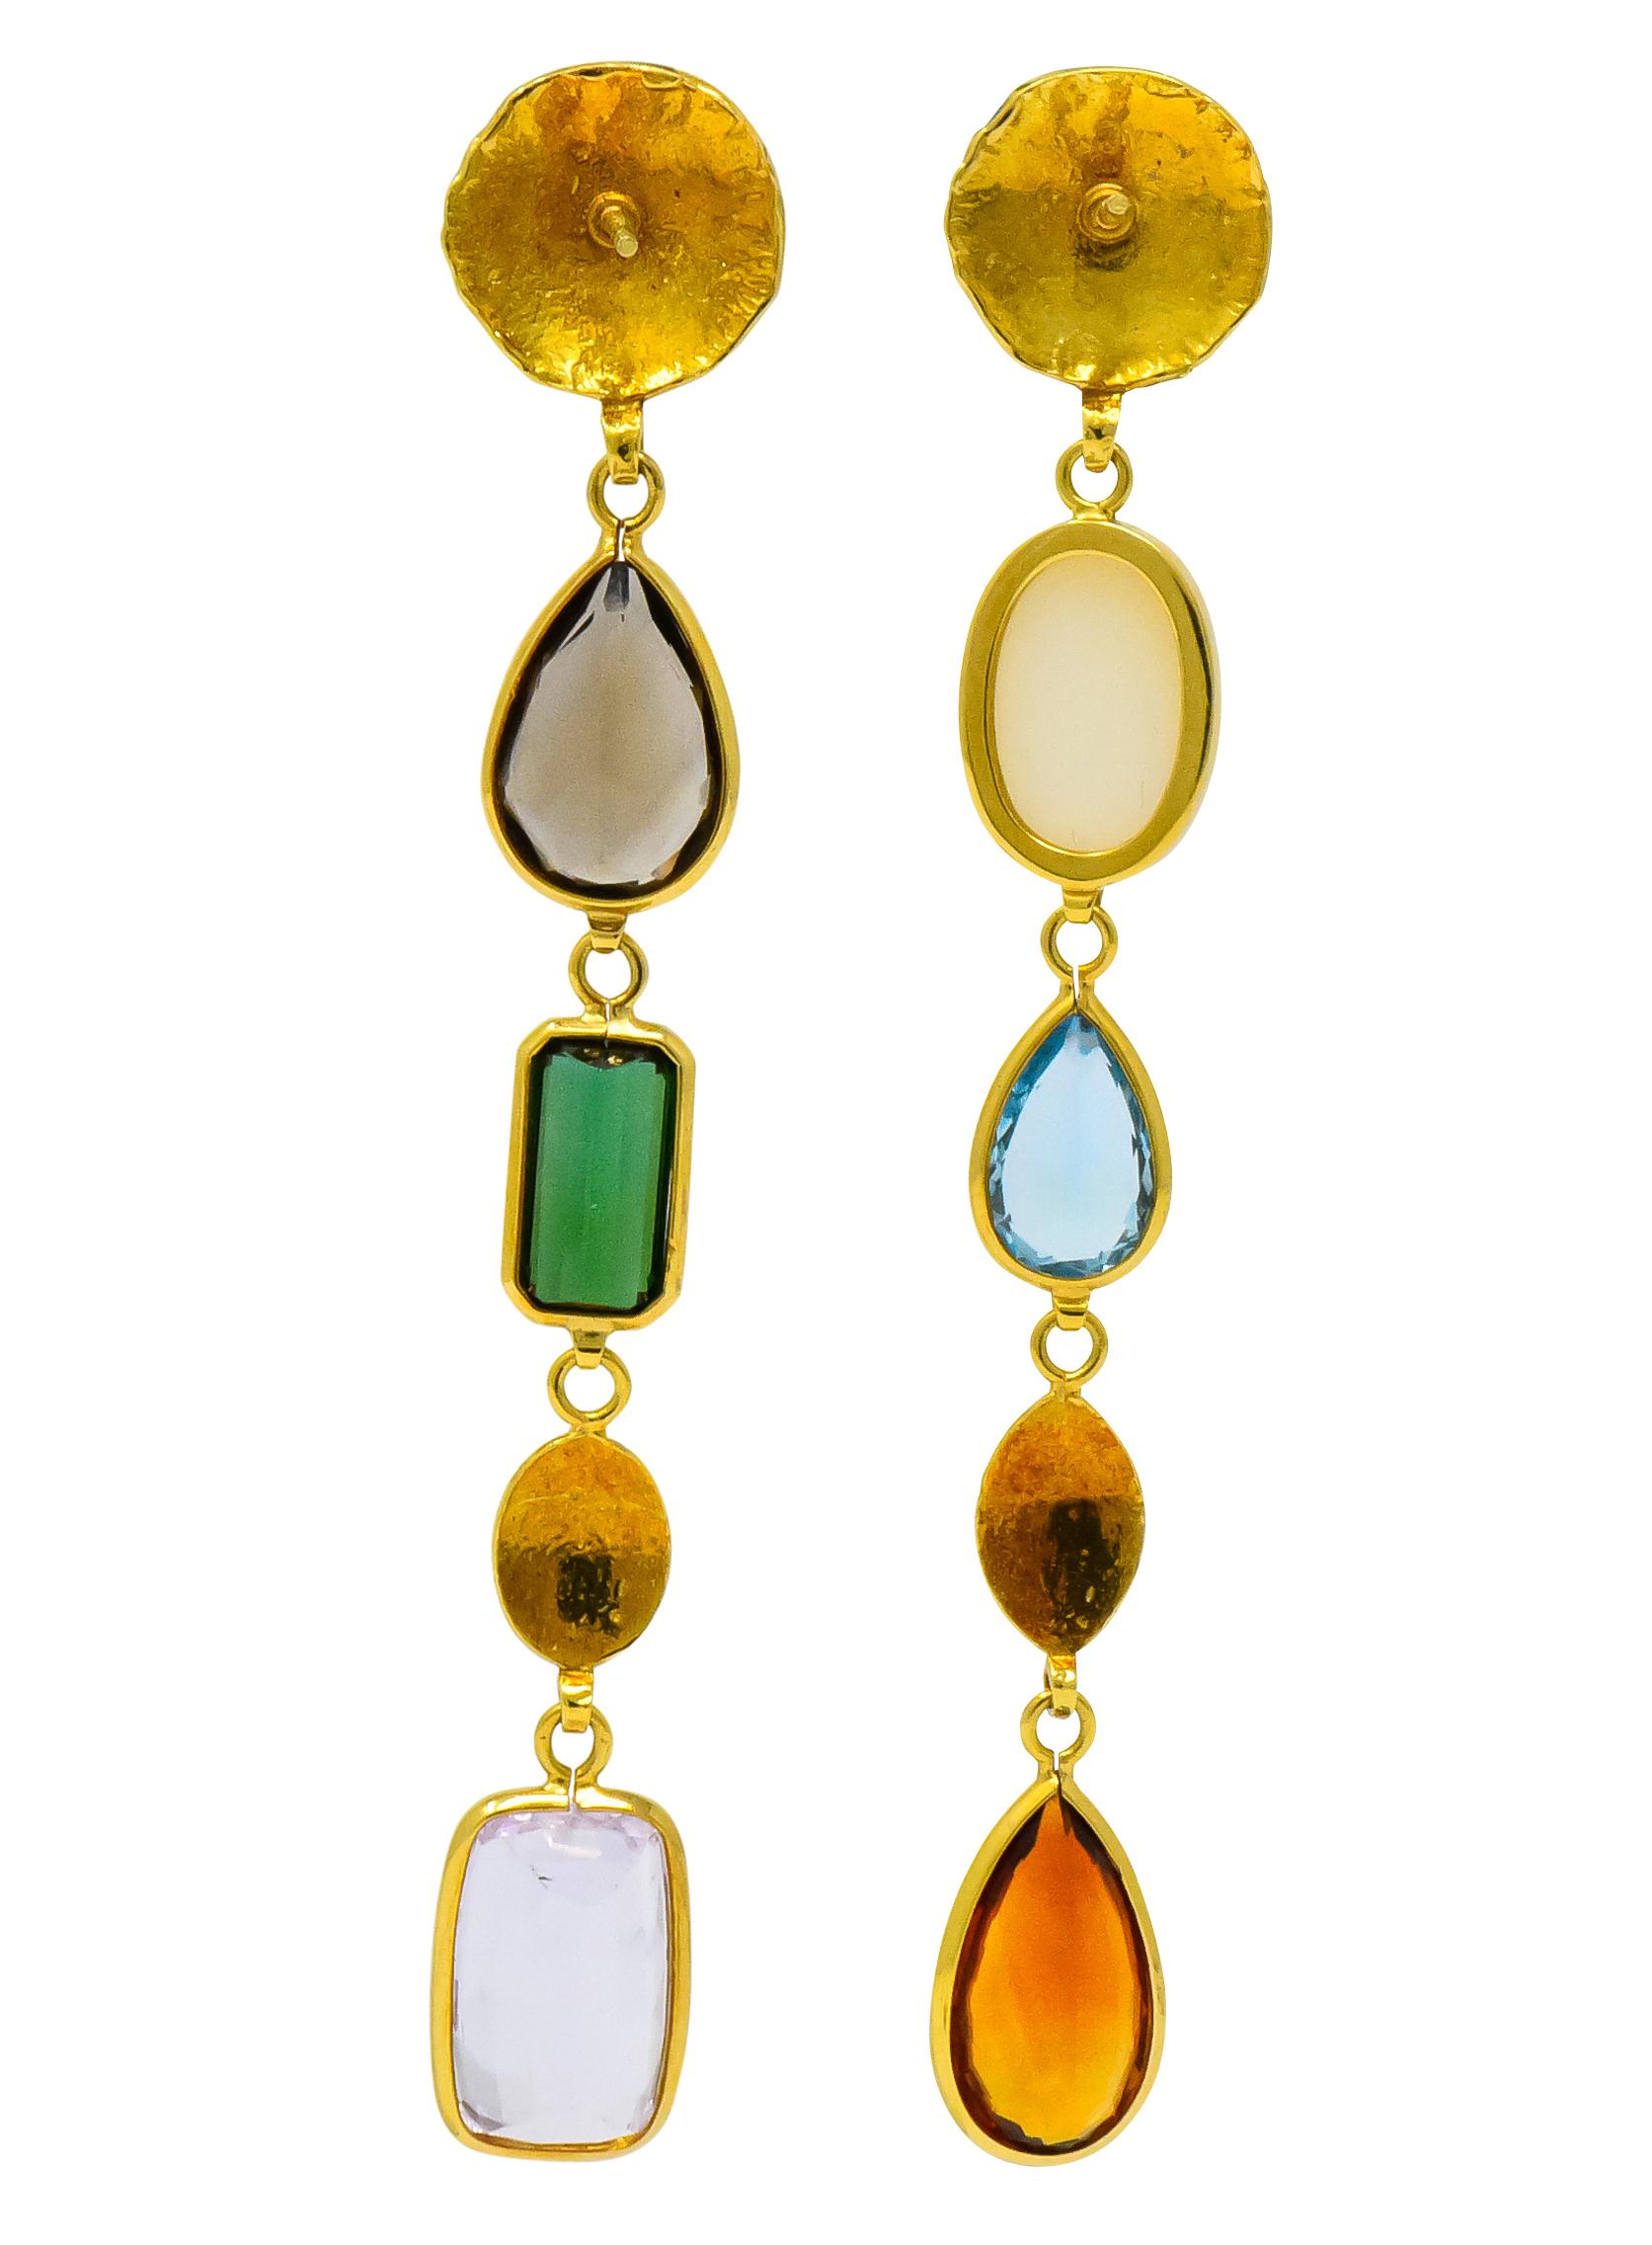 Each with textured gold disc surmounts, connected to bezel set drops comprised of various shaped and colored gemstones

One with oval cabochon opal, pear cut blue topaz, and pear cut citrine 

The other with pear cut smokey topaz, rectangular cut